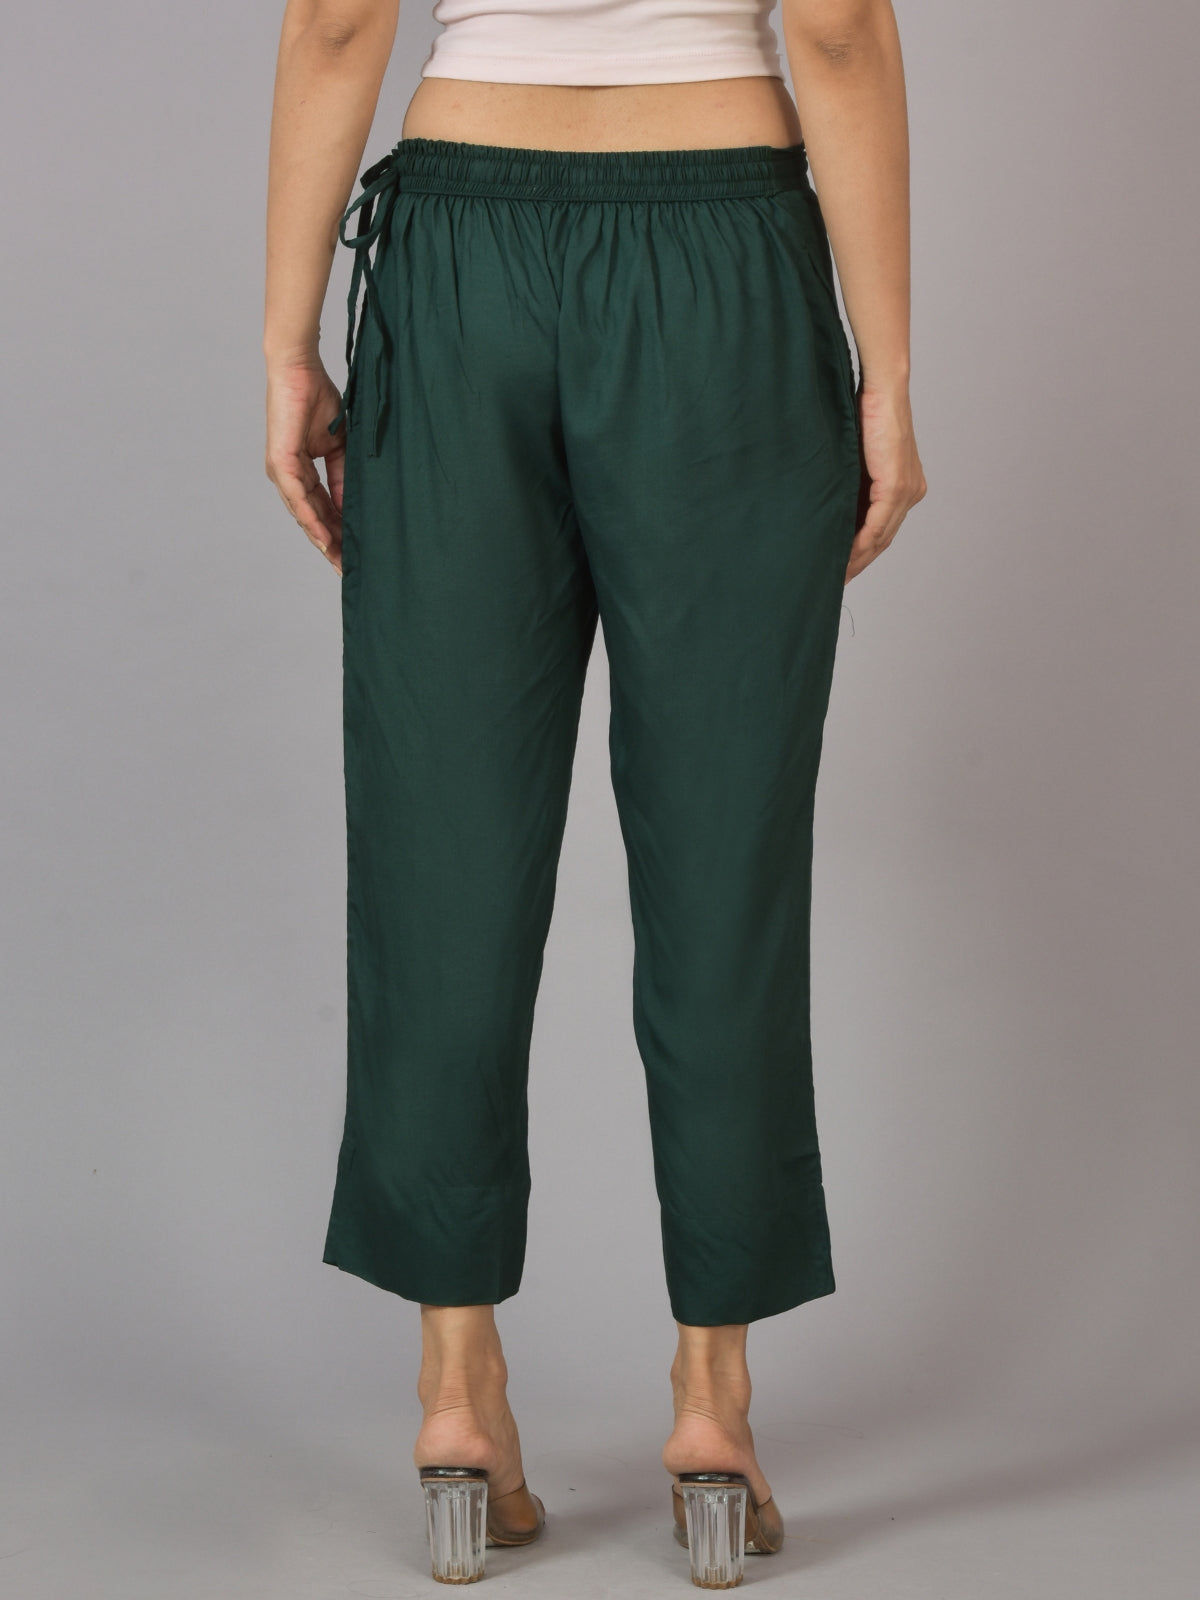 Pack Of 2 Womens Dark Green And Gajri Ankle Length Rayon Culottes Trouser Combo